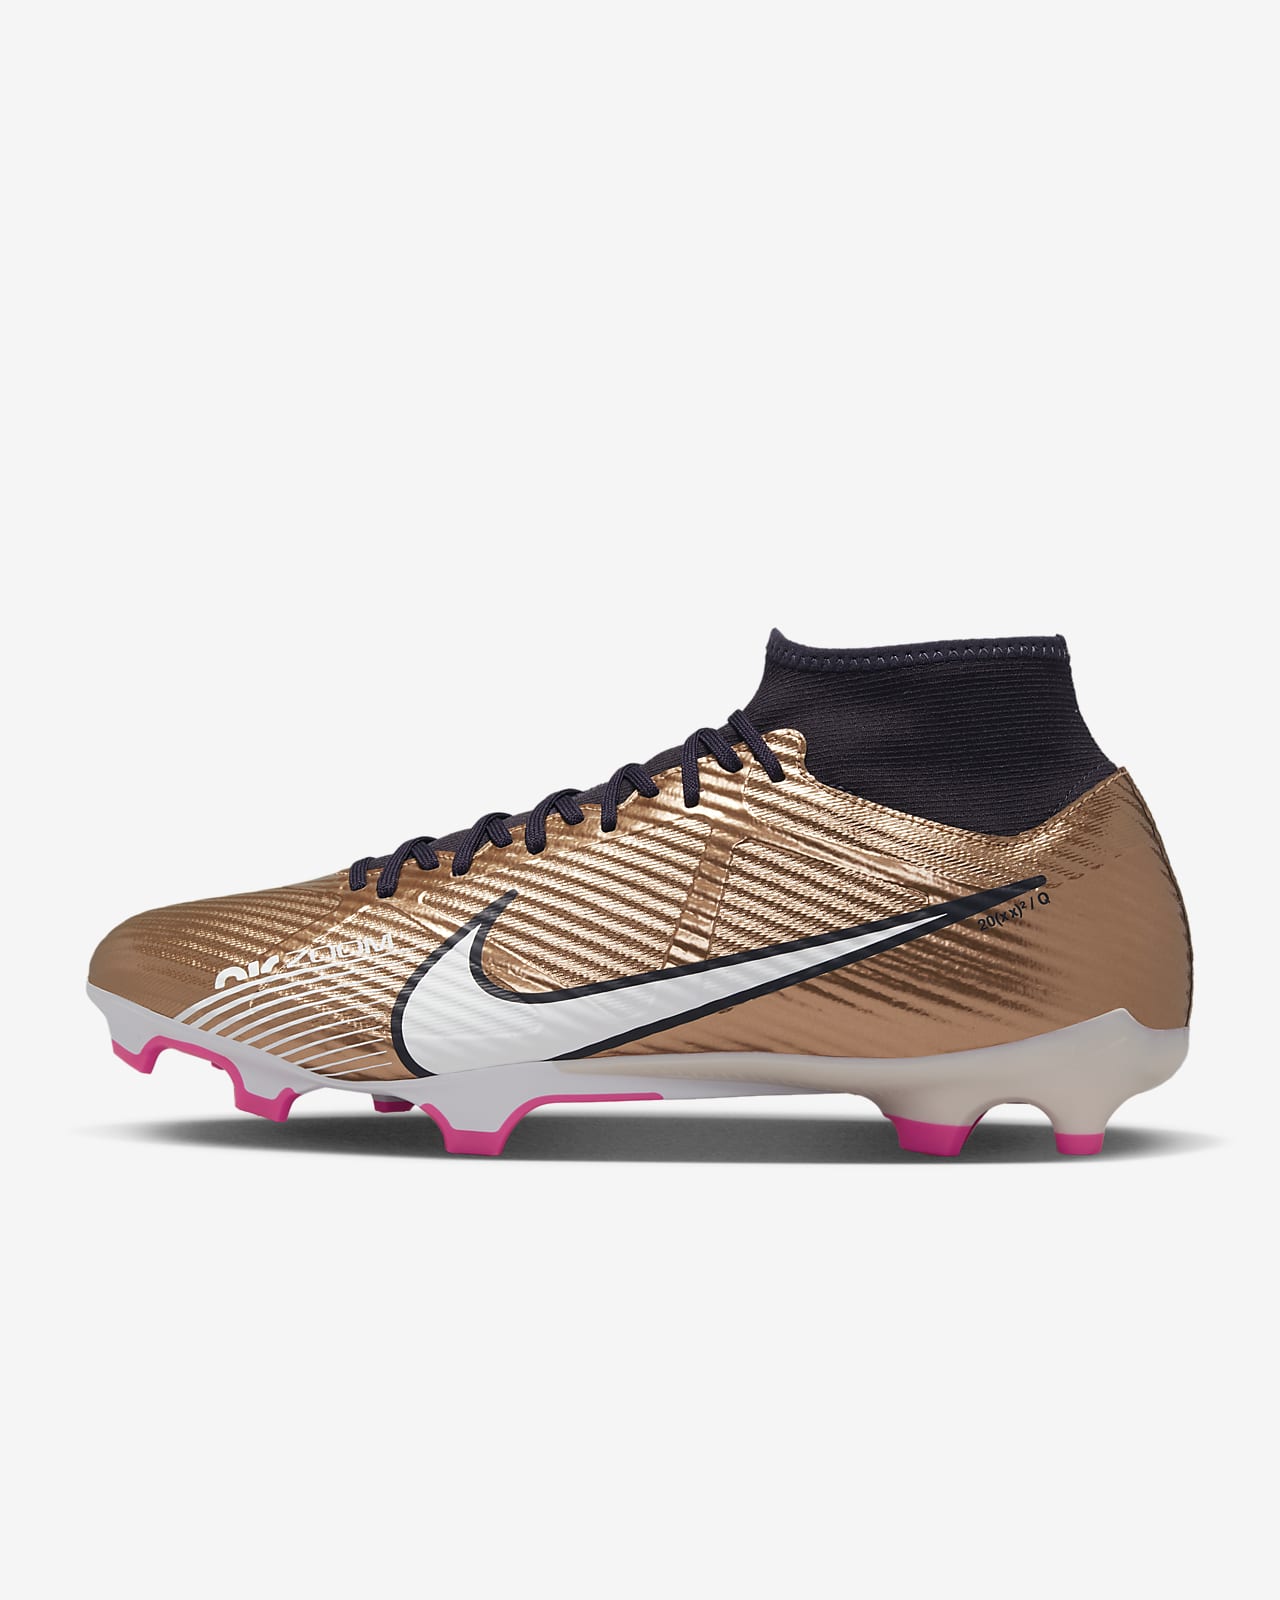 nike mercurial boots price in india